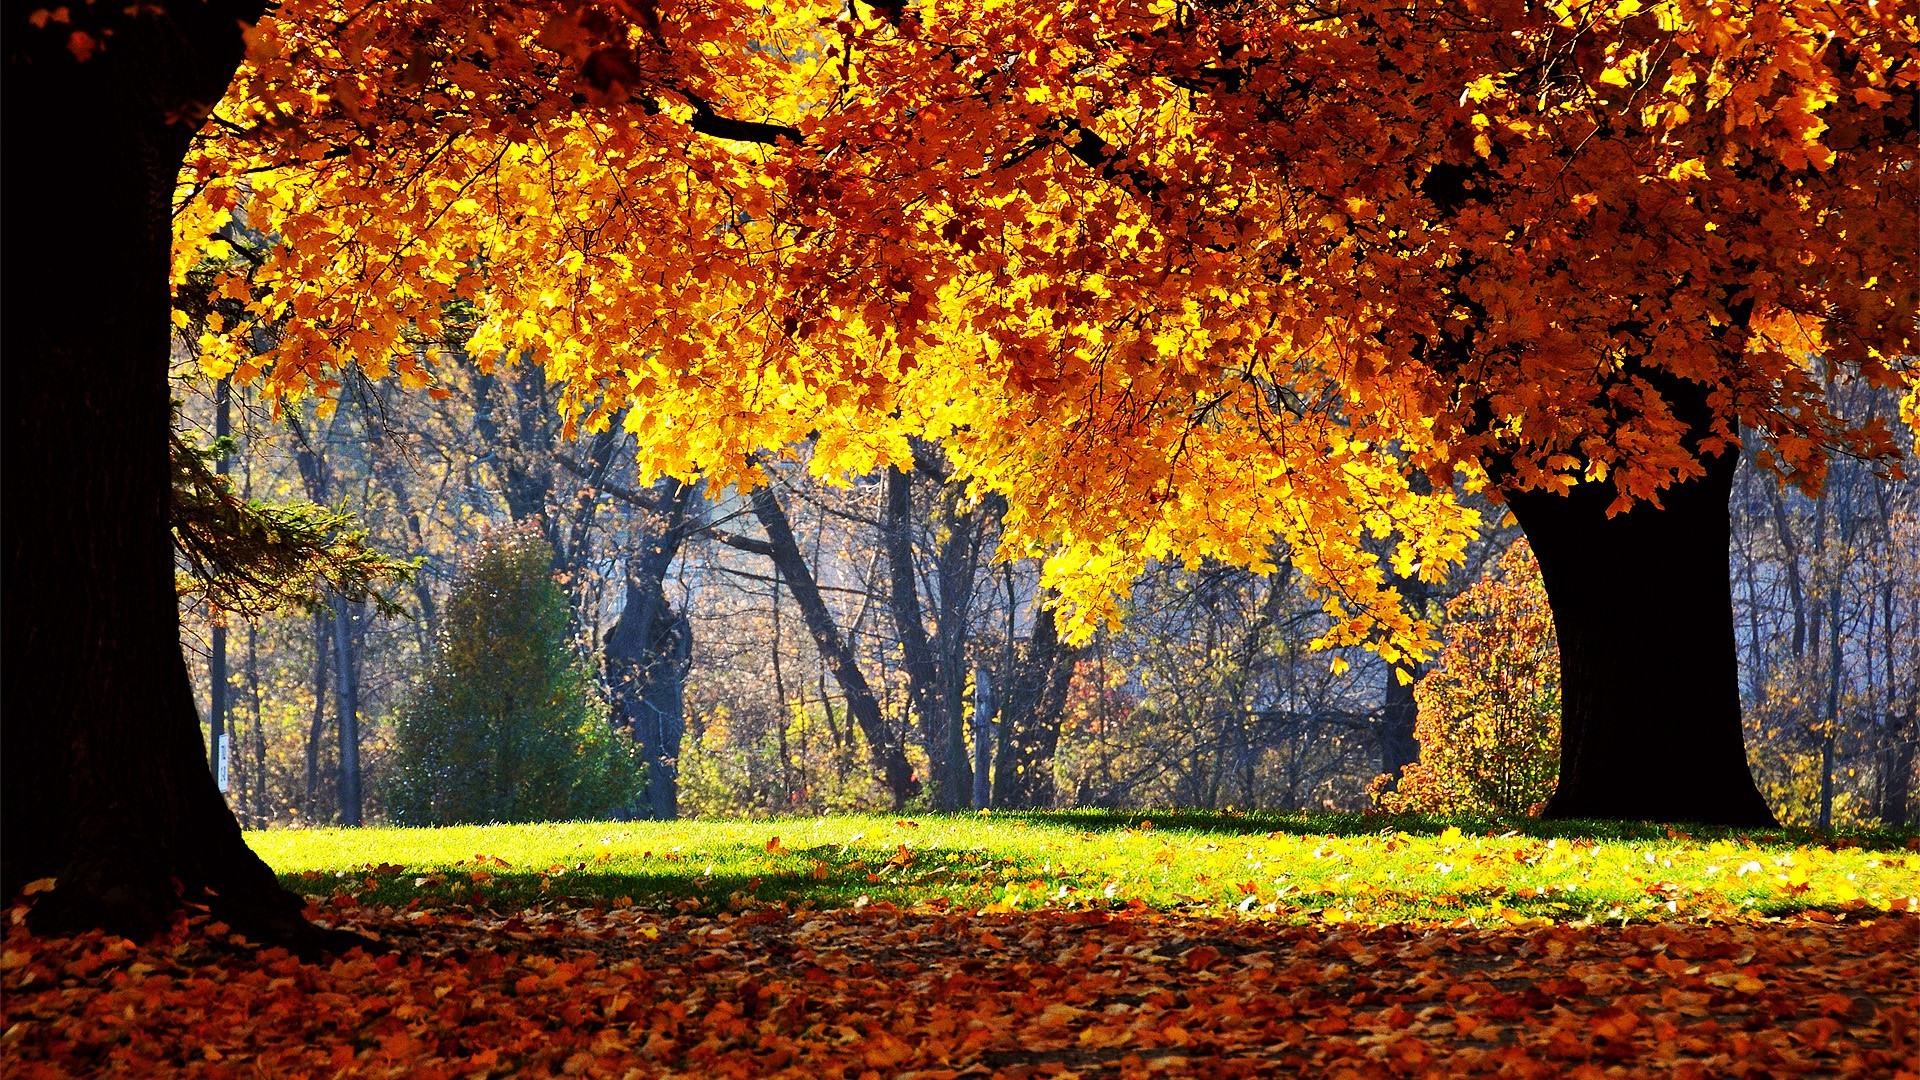 Download 1920x1080 Sunny Autumn day wallpaper